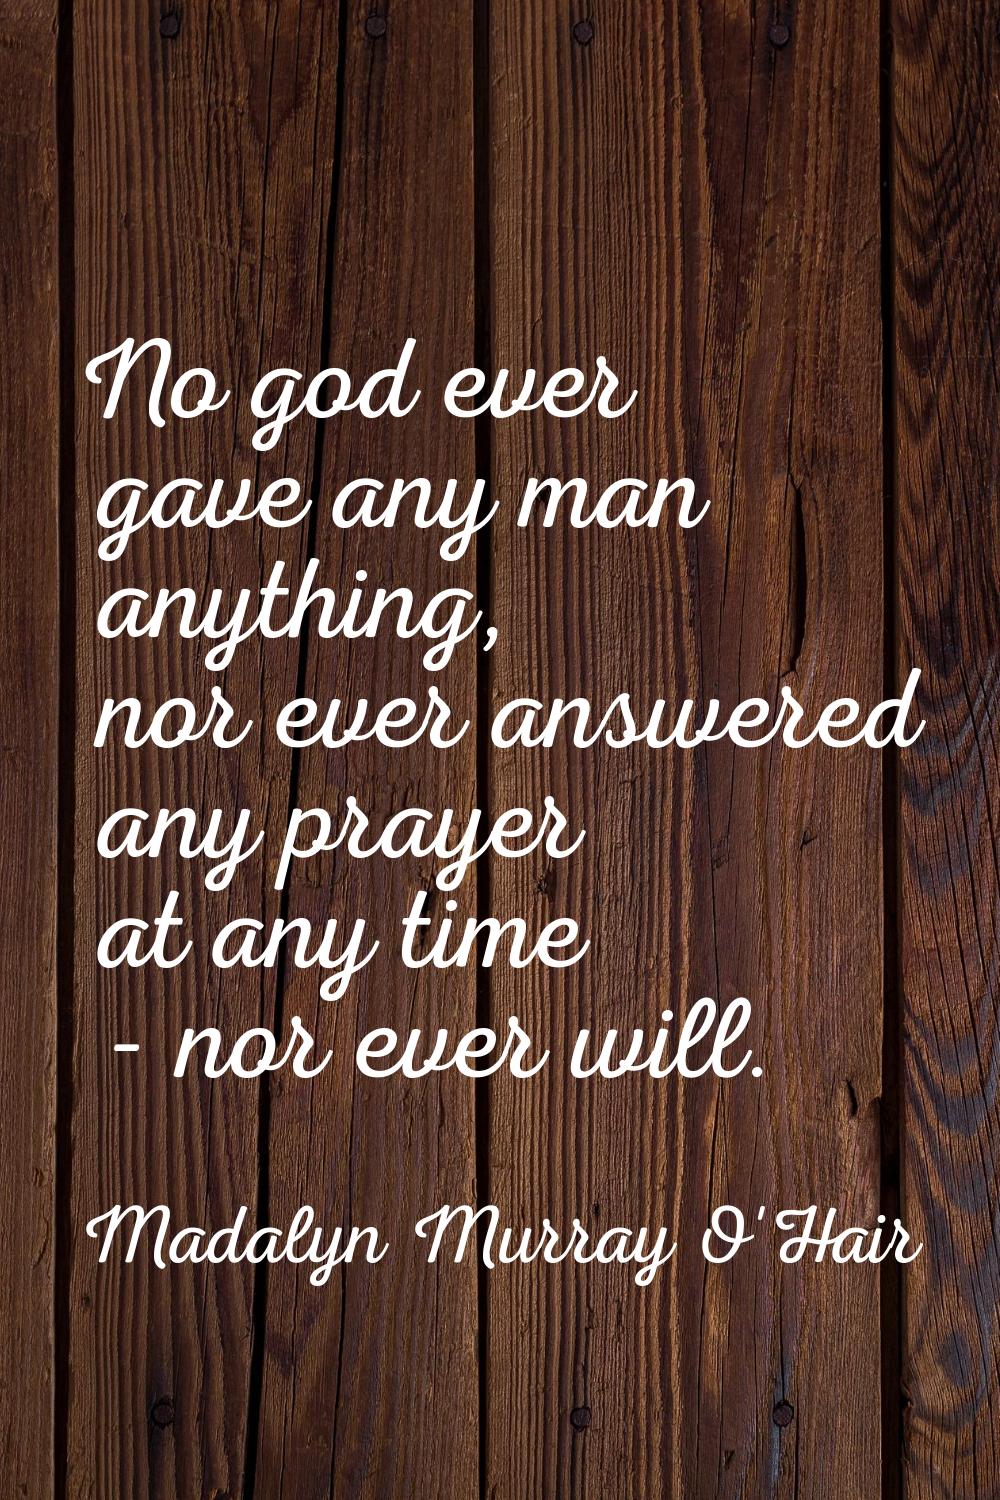 No god ever gave any man anything, nor ever answered any prayer at any time - nor ever will.